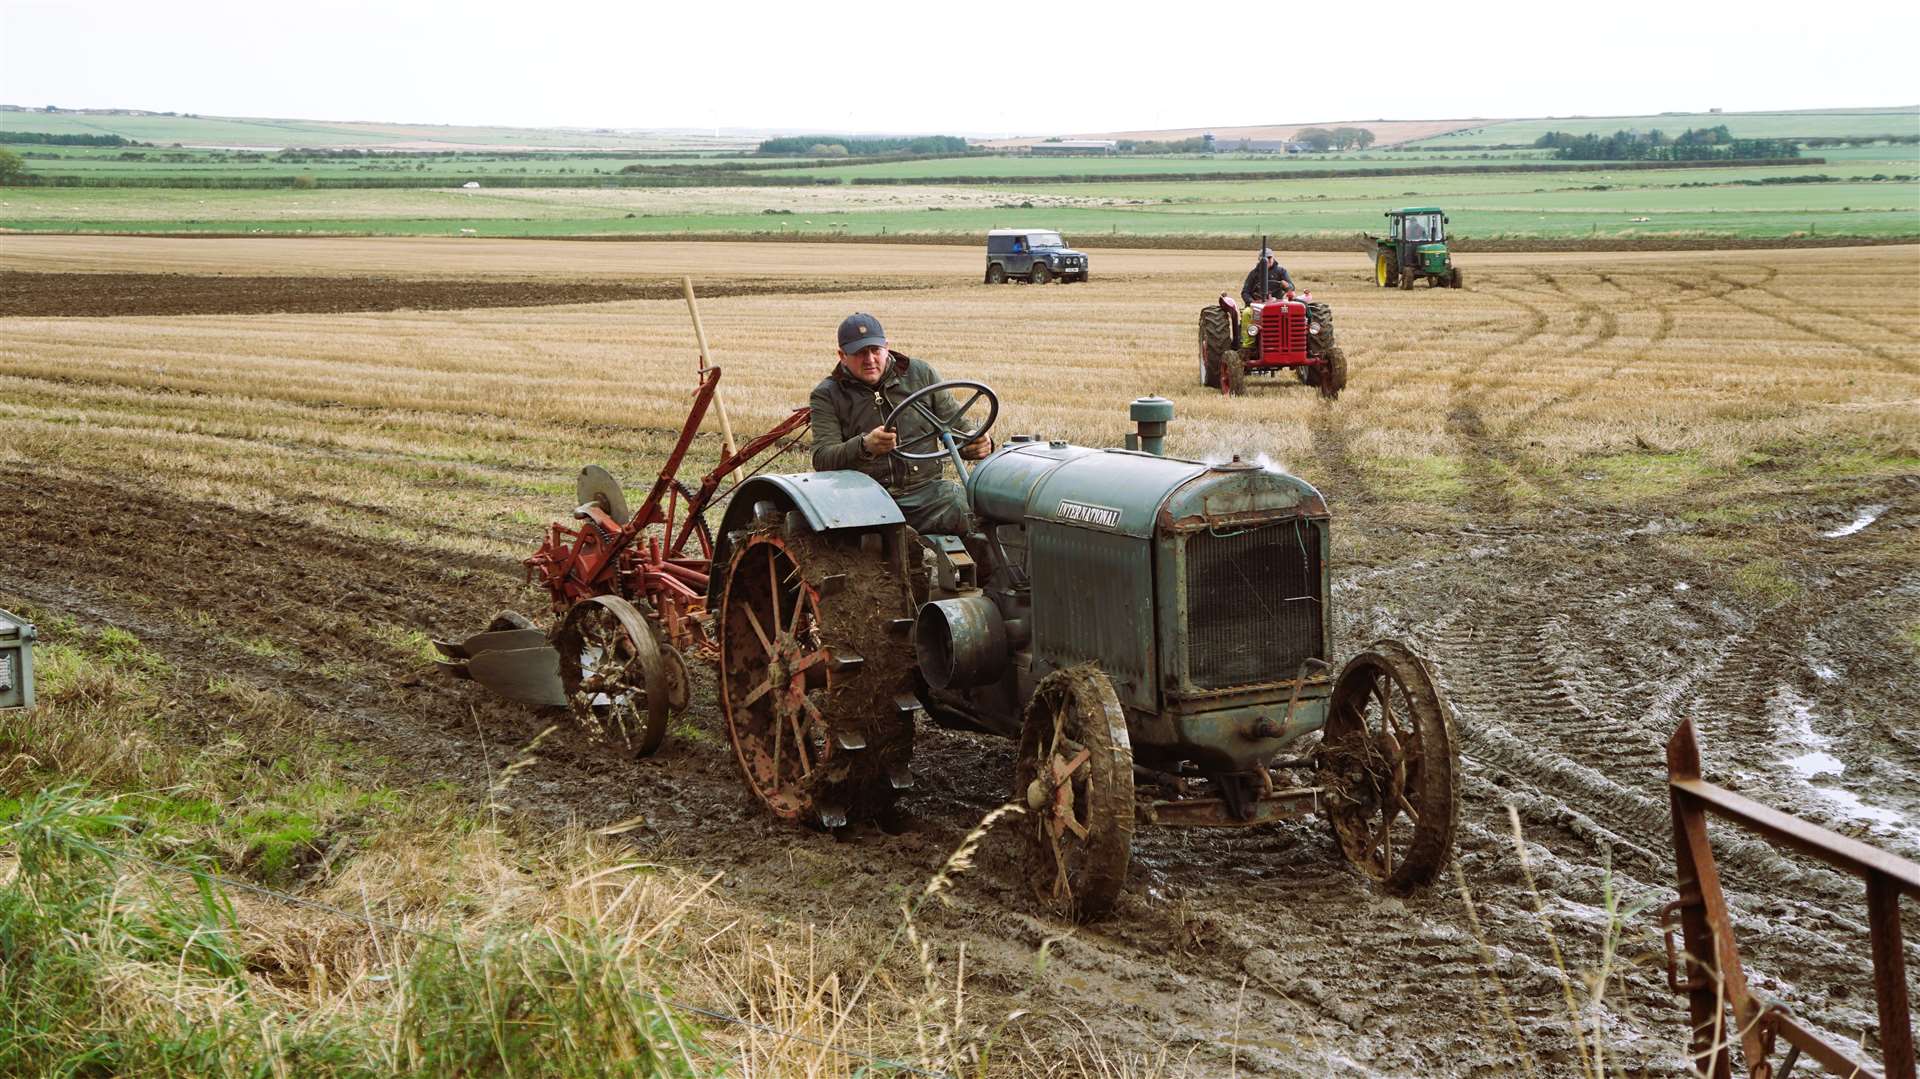 Heading back at the end of the event is overall winner Michael Mackay with his International tractor dating from 1929 and a drag plough. Picture: DGS